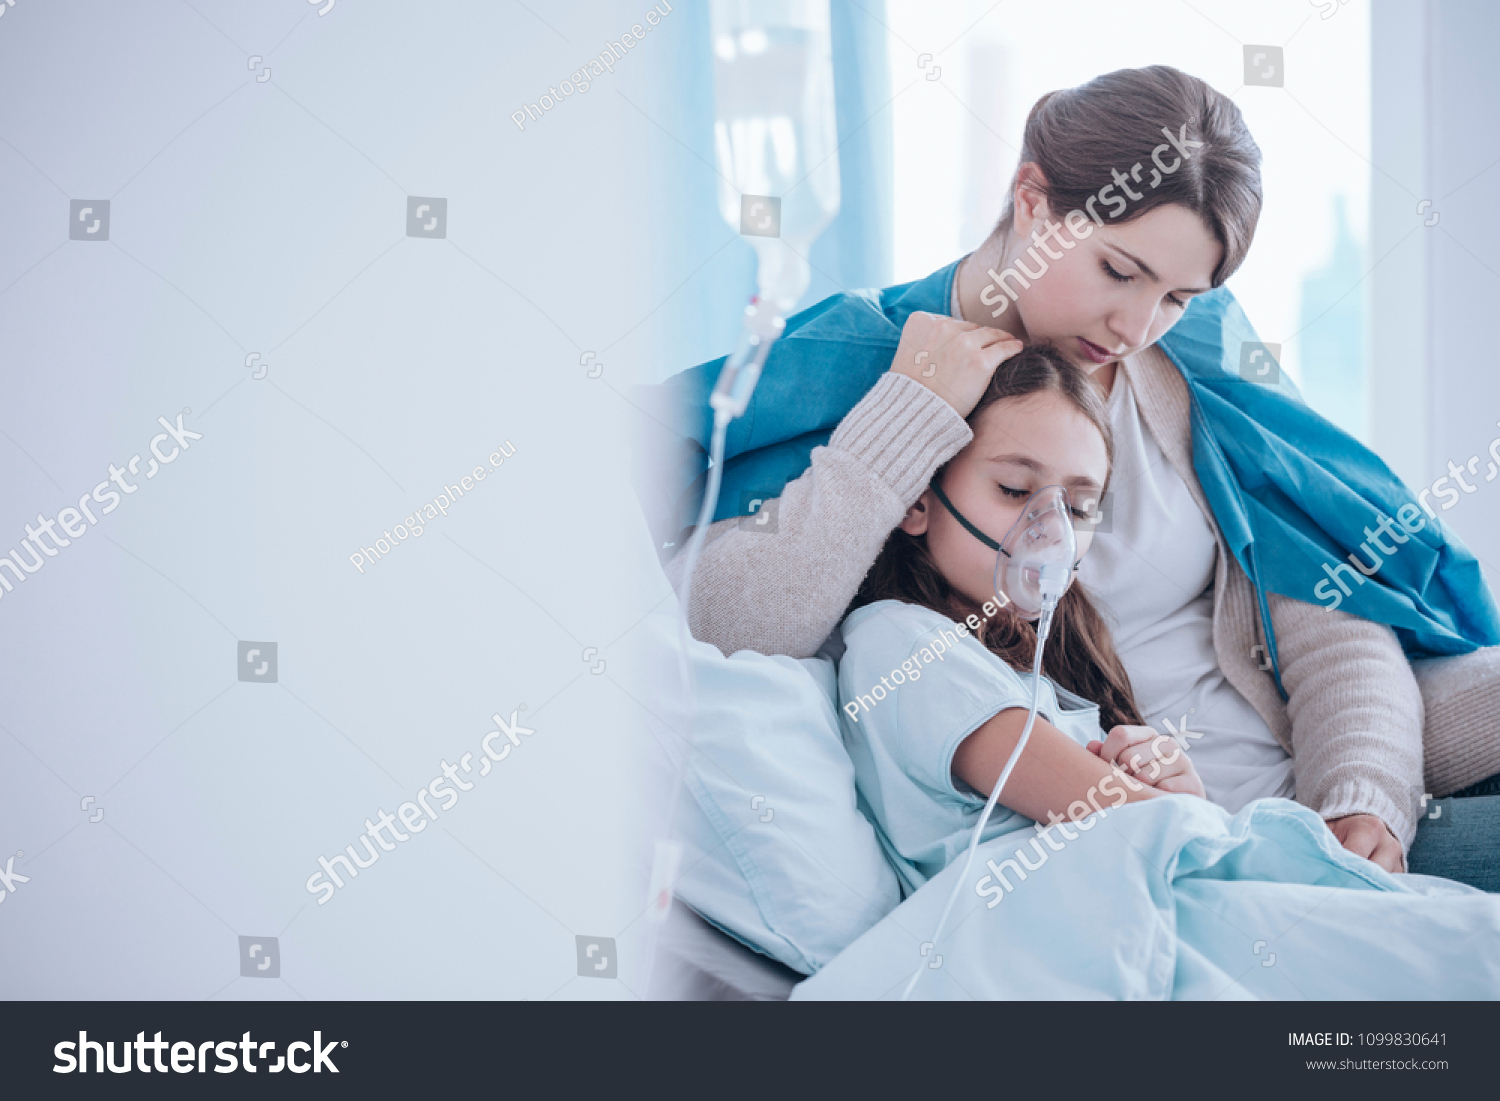 Worried mother taking care of her daughter wearing an oxygen mask in the hospital #1099830641